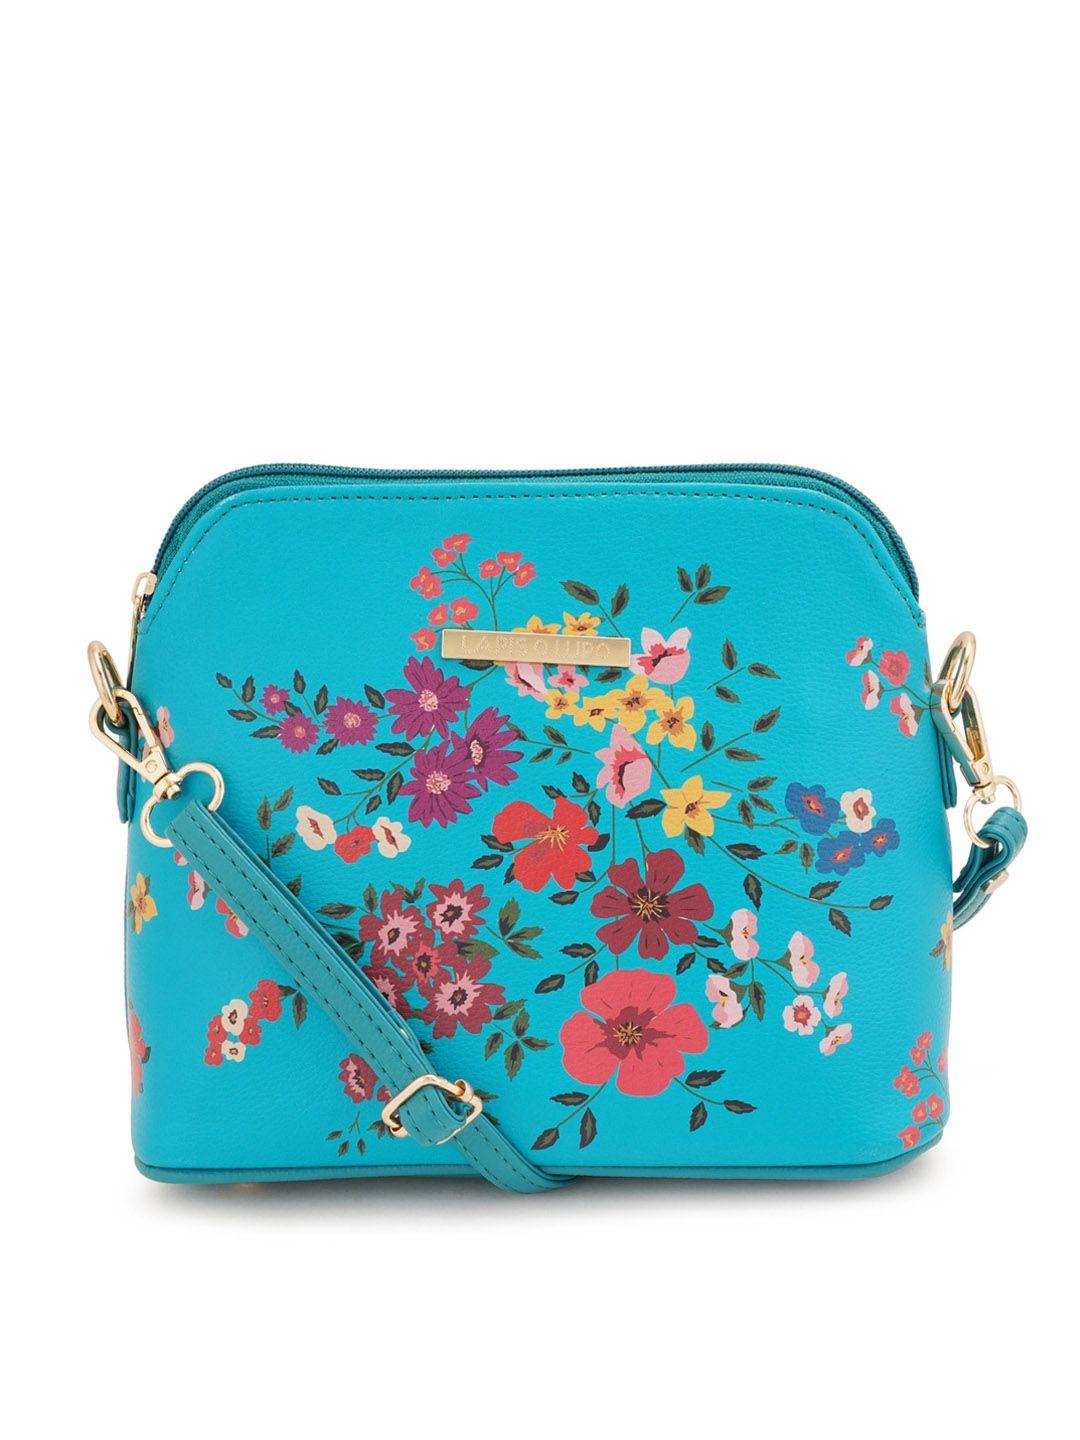 lapis o lupo women floral printed structured sling bag